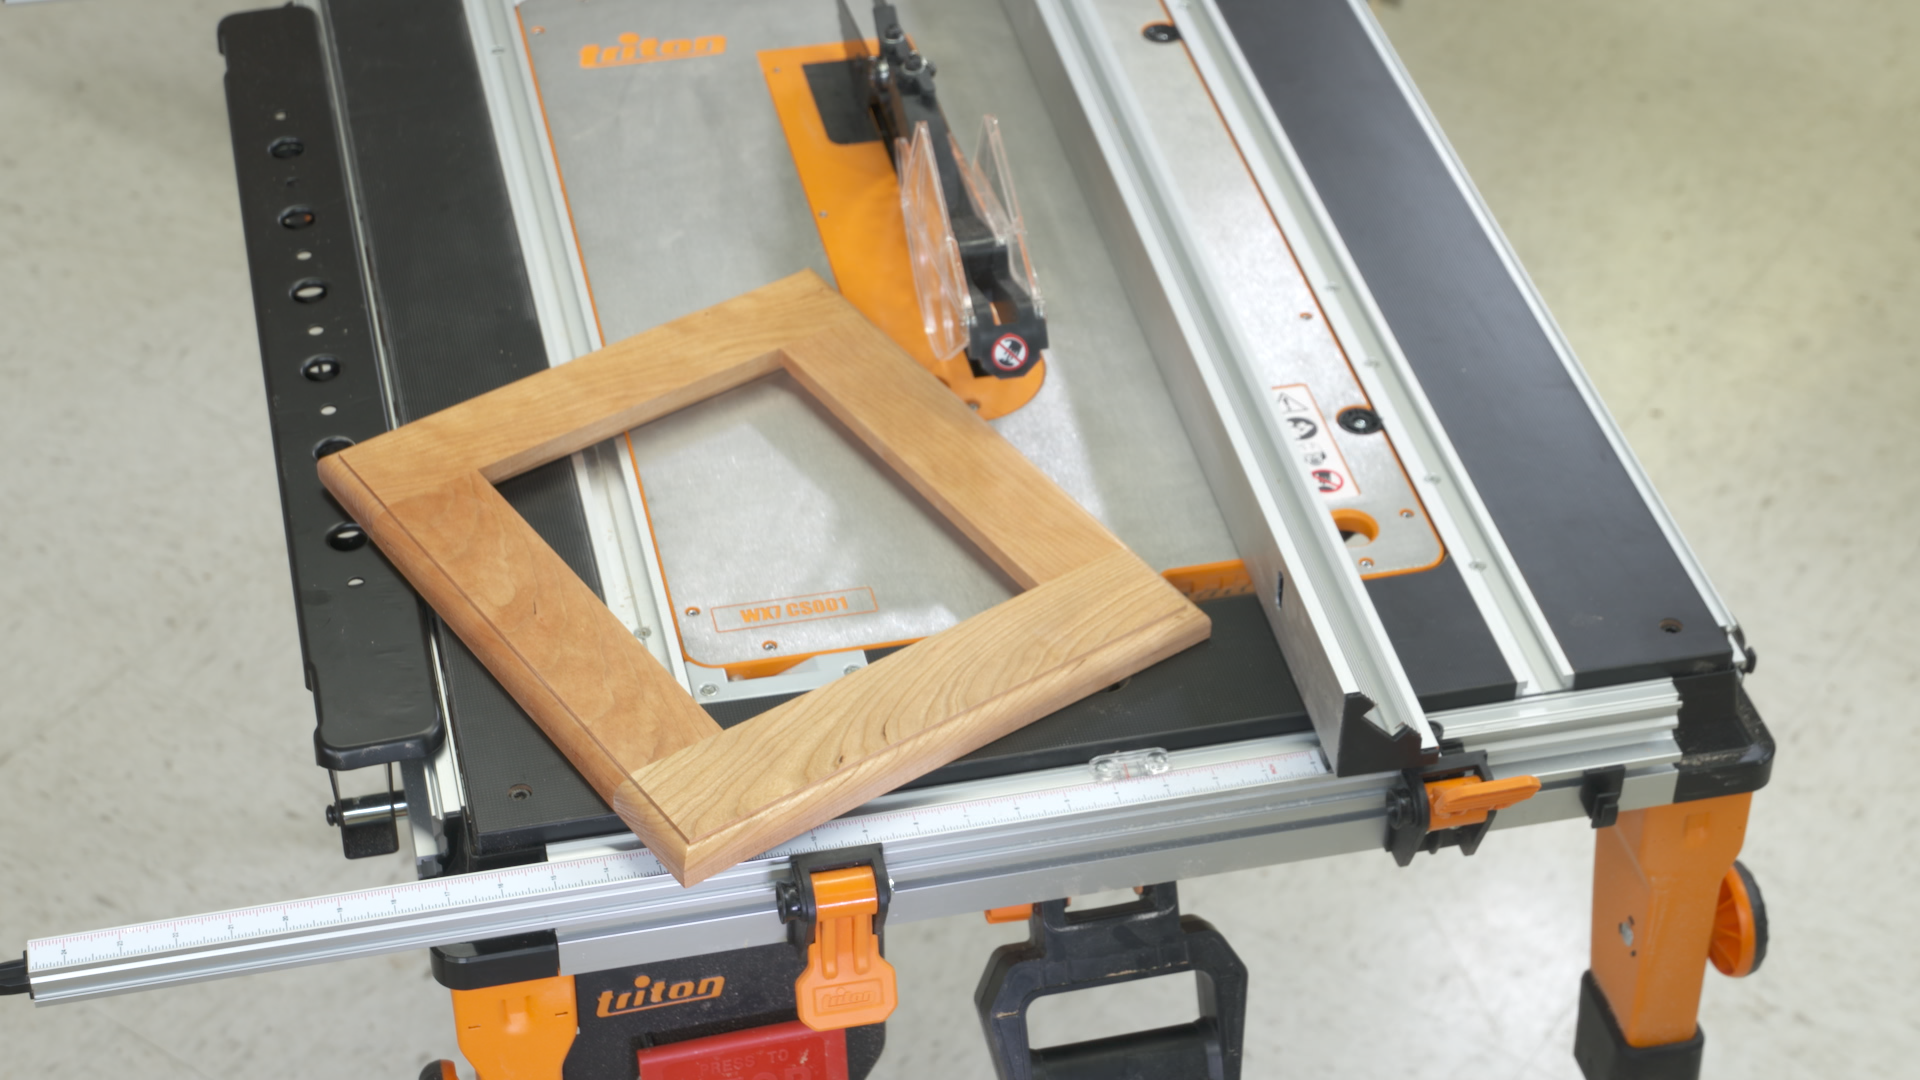 Making a wooden picture frame